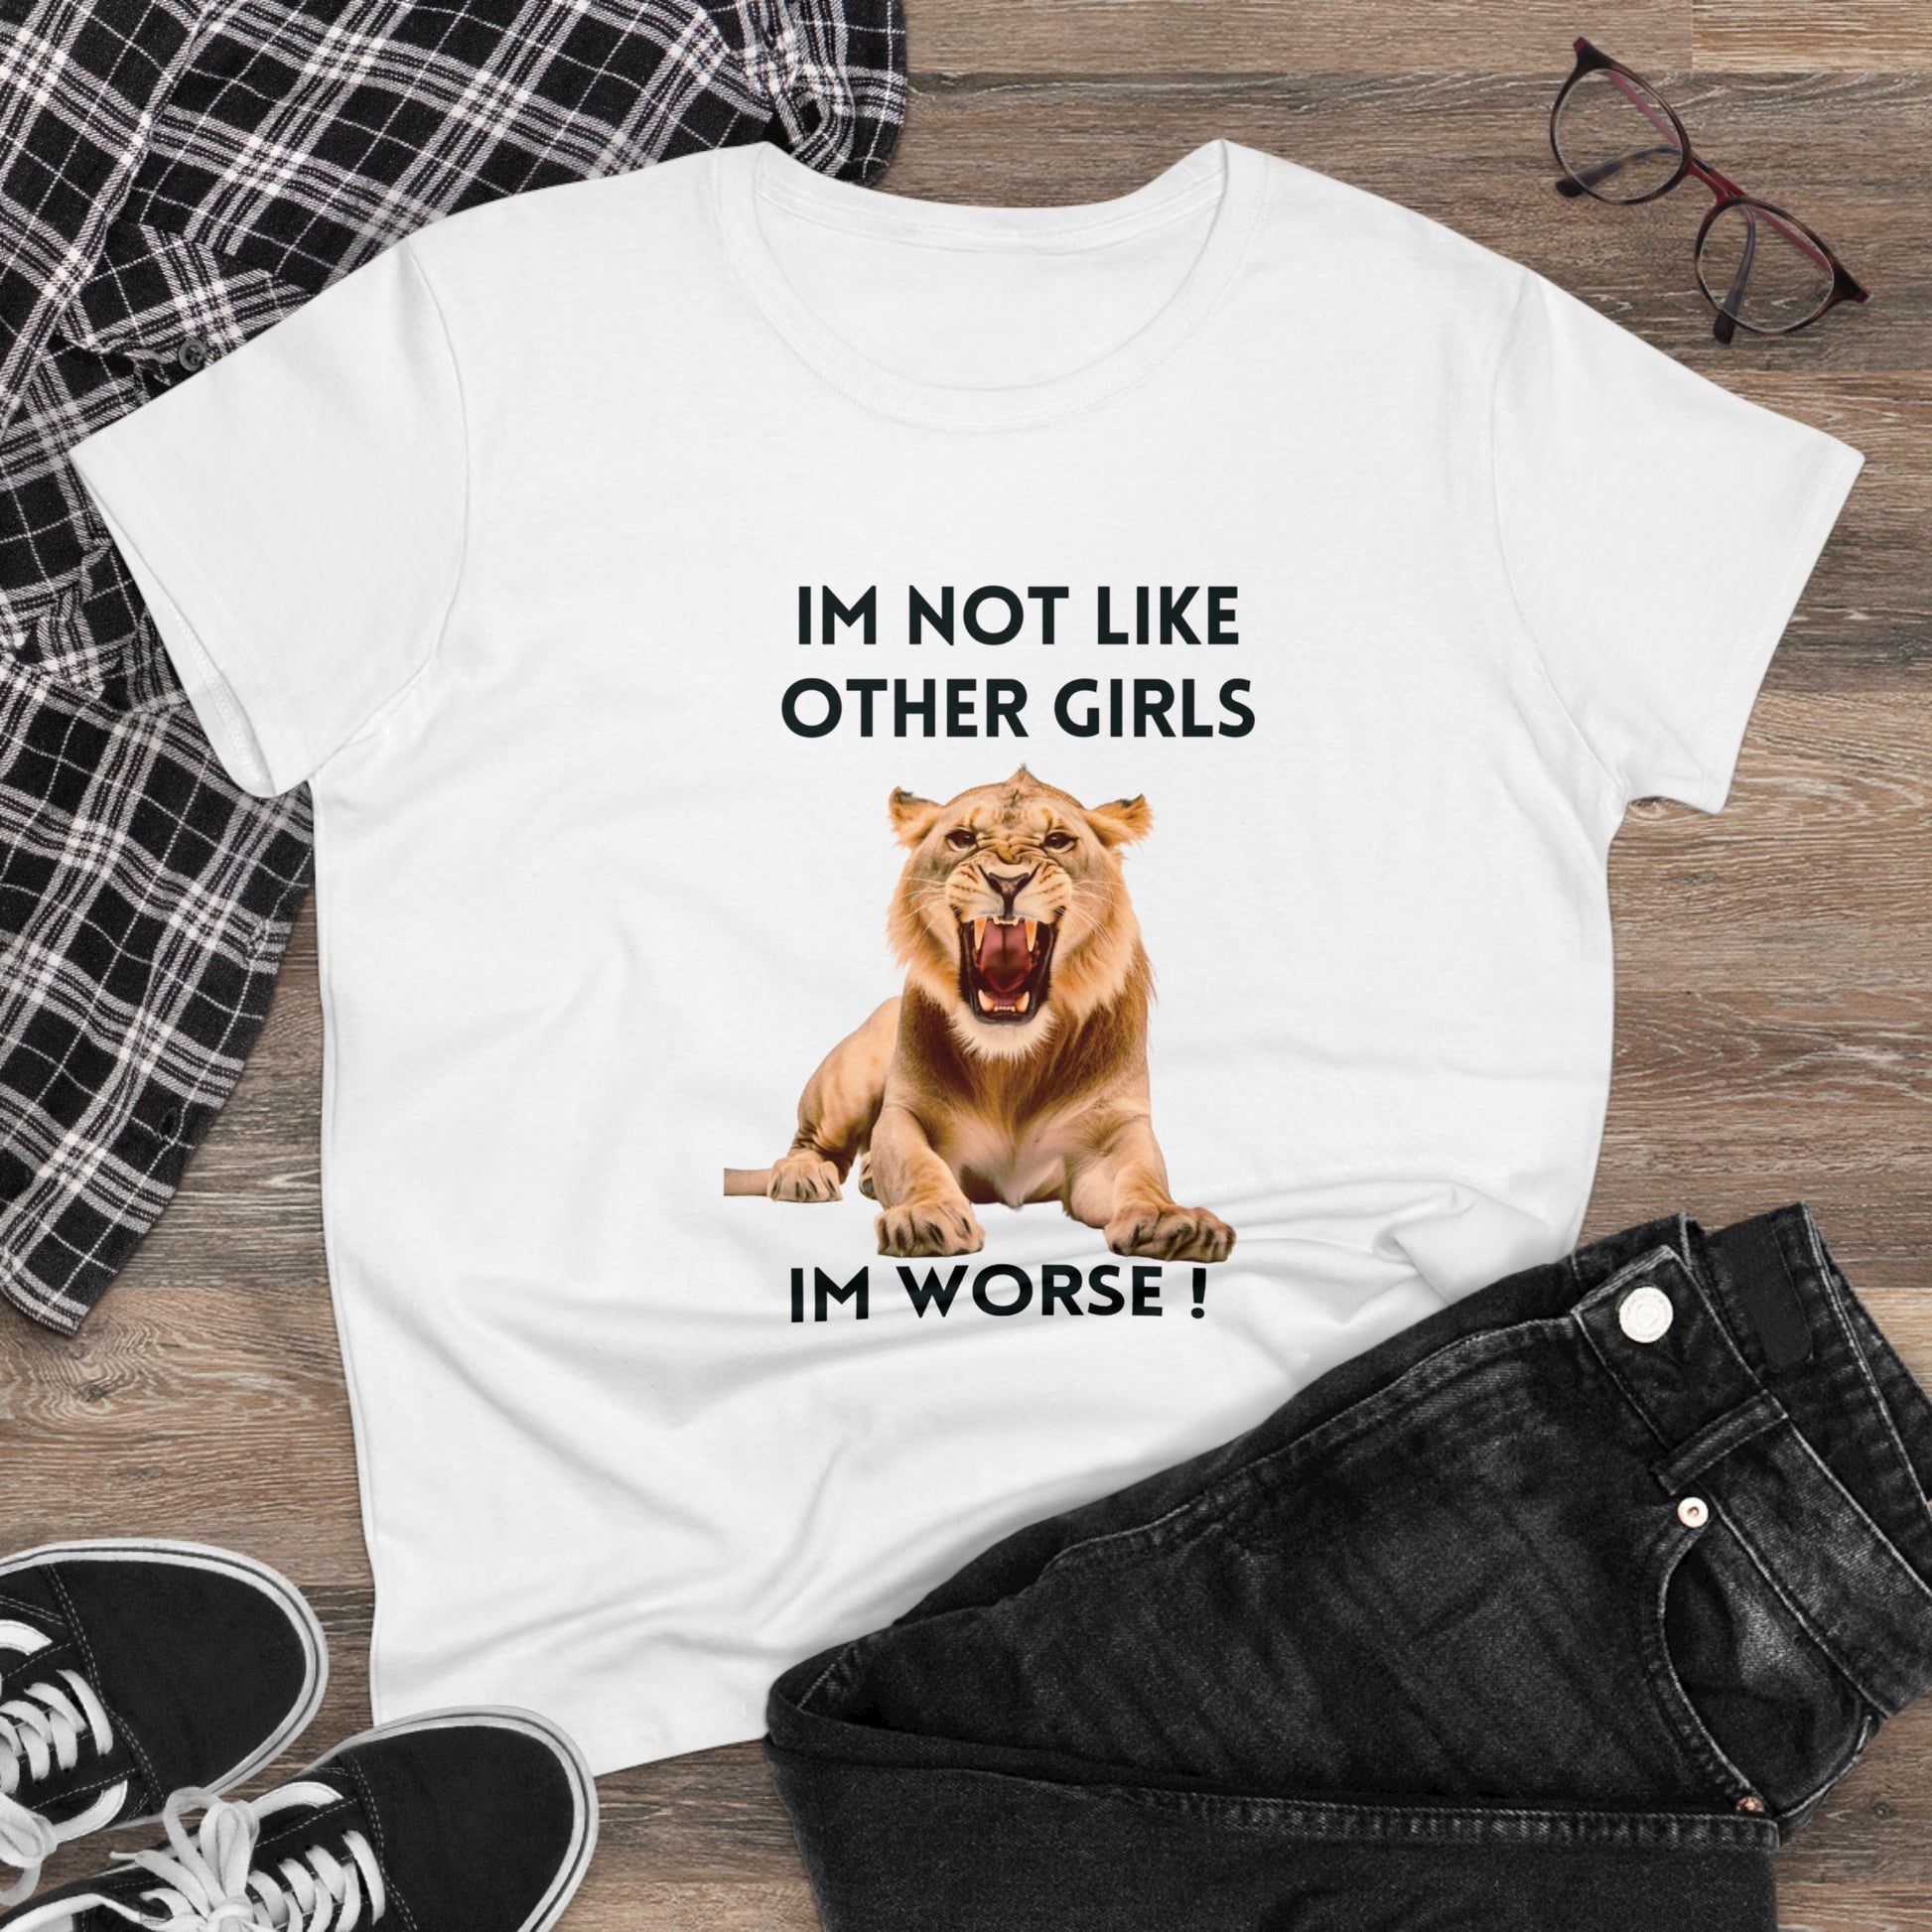 Angry Lion Funny T-Shirt - I'm Not Like Other Girls T-Shirt White S 